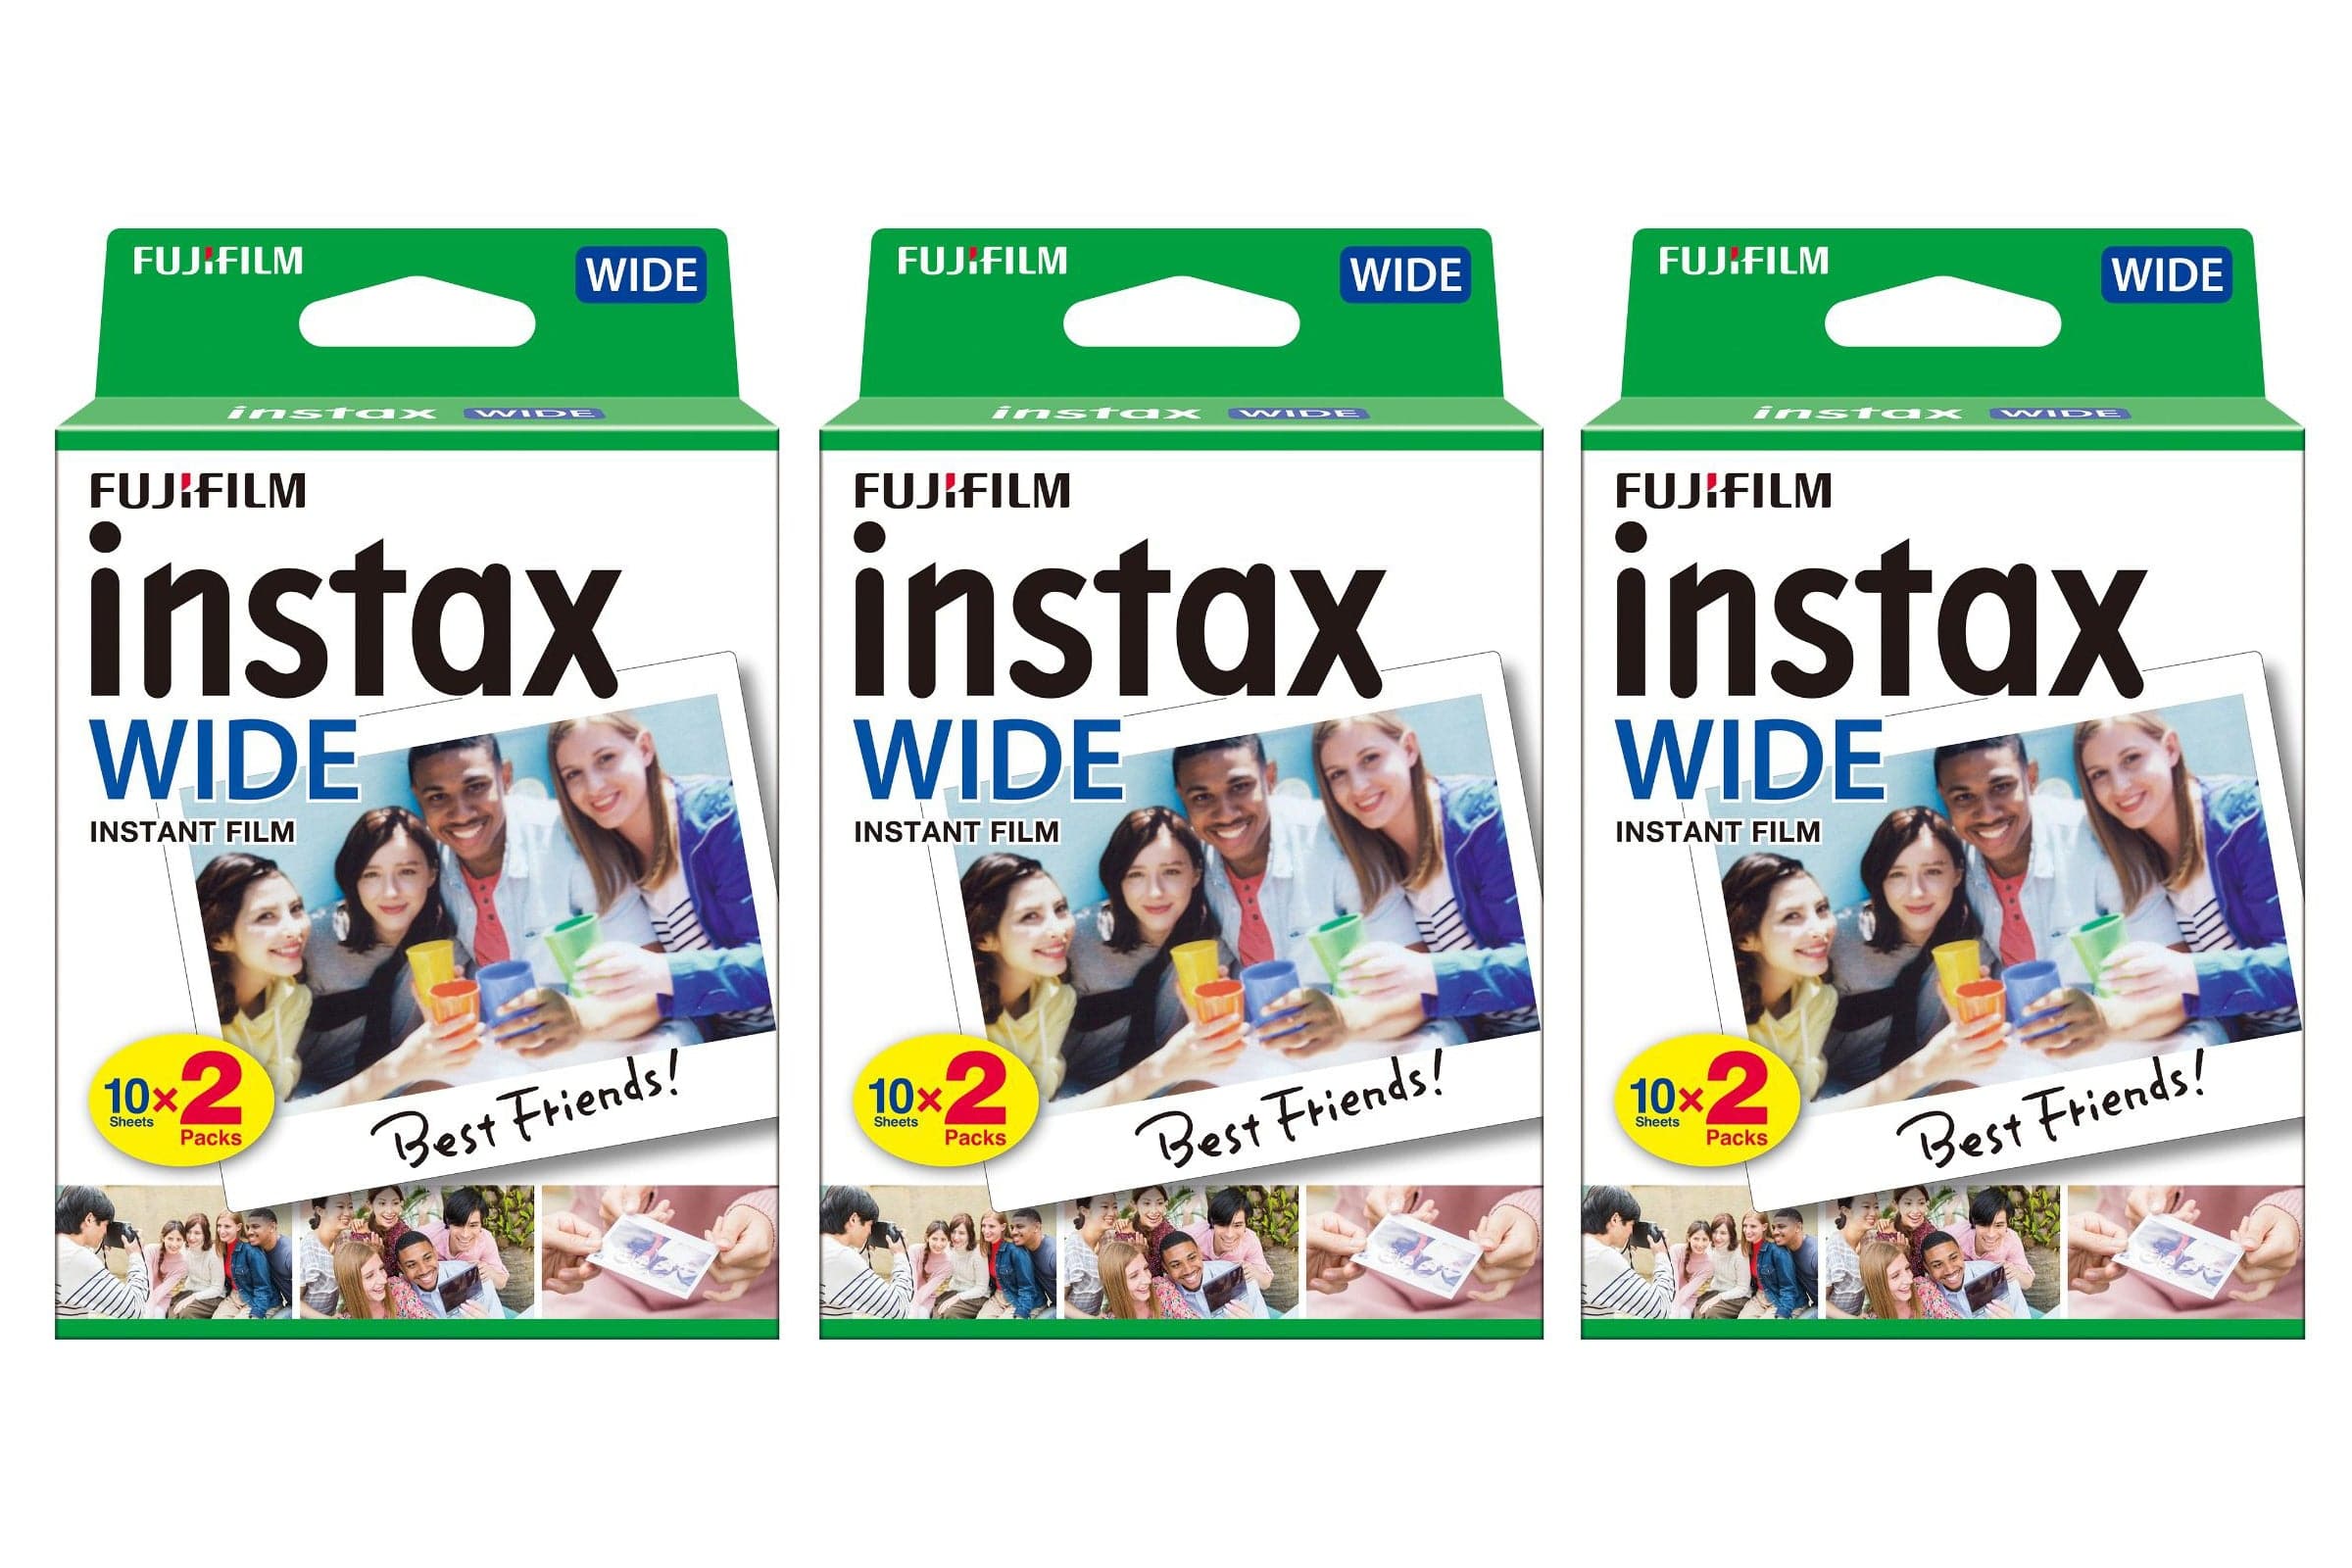 Fujifilm Instax Wide Picture Format Instant Photo Film - White (Pack of 60)